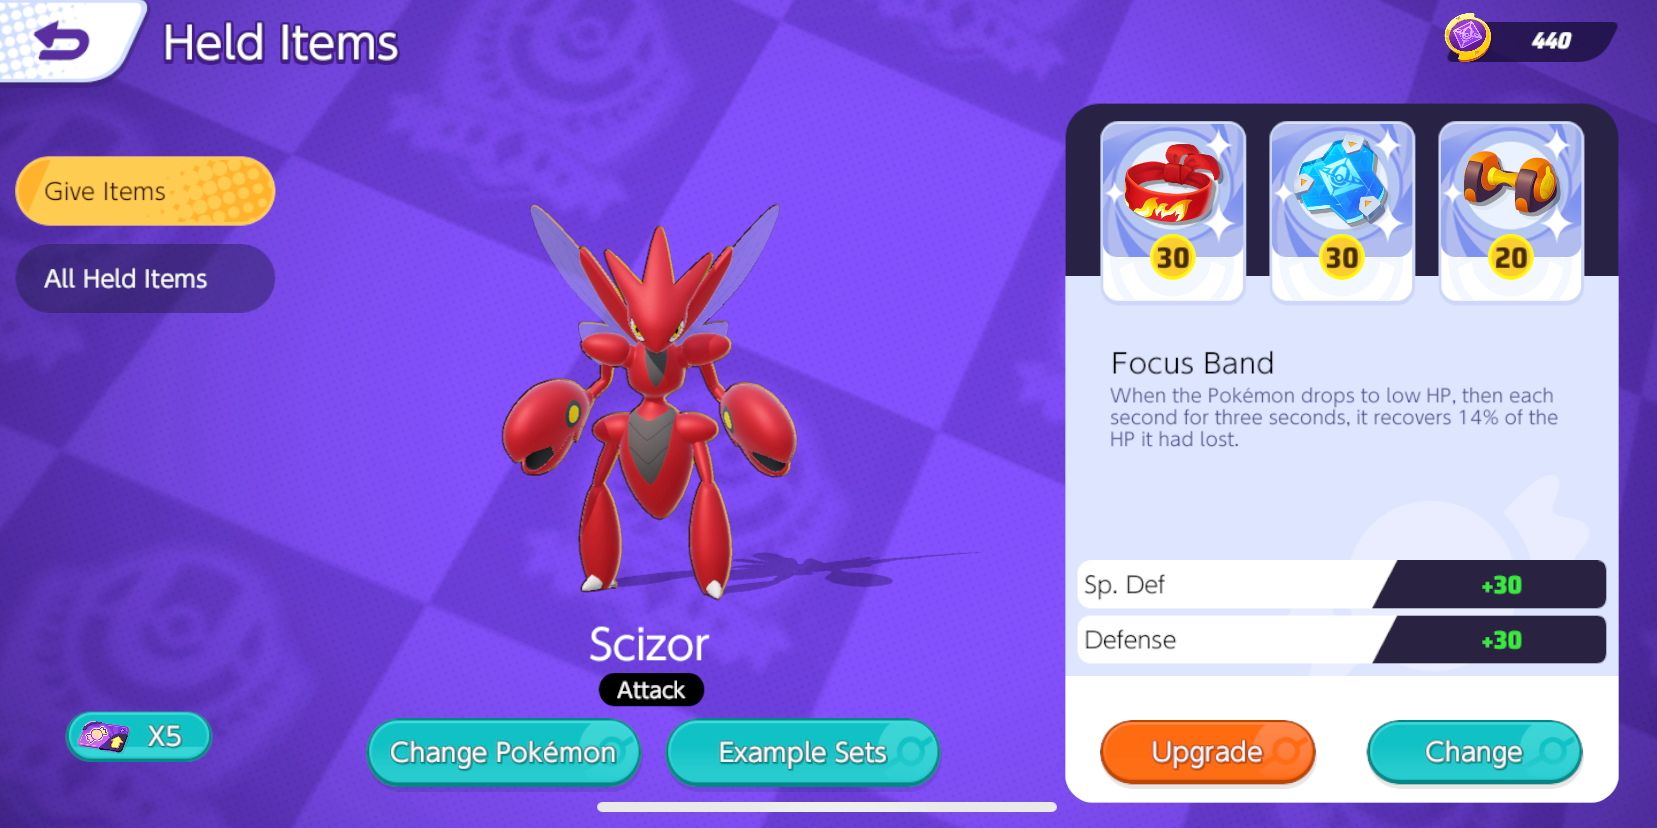 Scizor Held Item selection screen, with Focus Band, Buddy Barrier, and Attack Weight selected